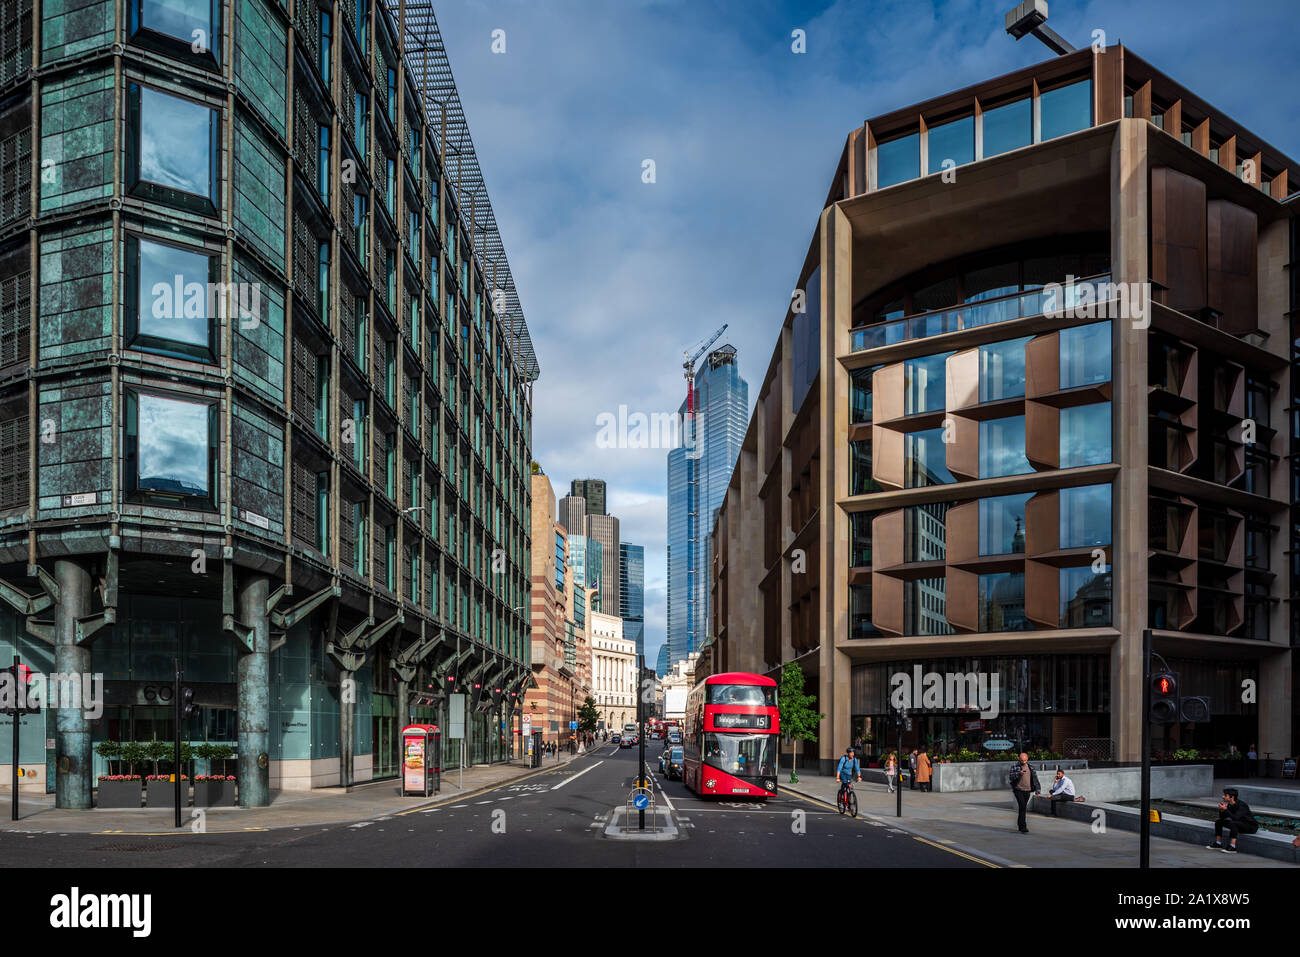 City of London Financial District. Bloomberg Building London und 60 Queen Victoria Street HSBC-Büros im City of London Financial District. Stockfoto